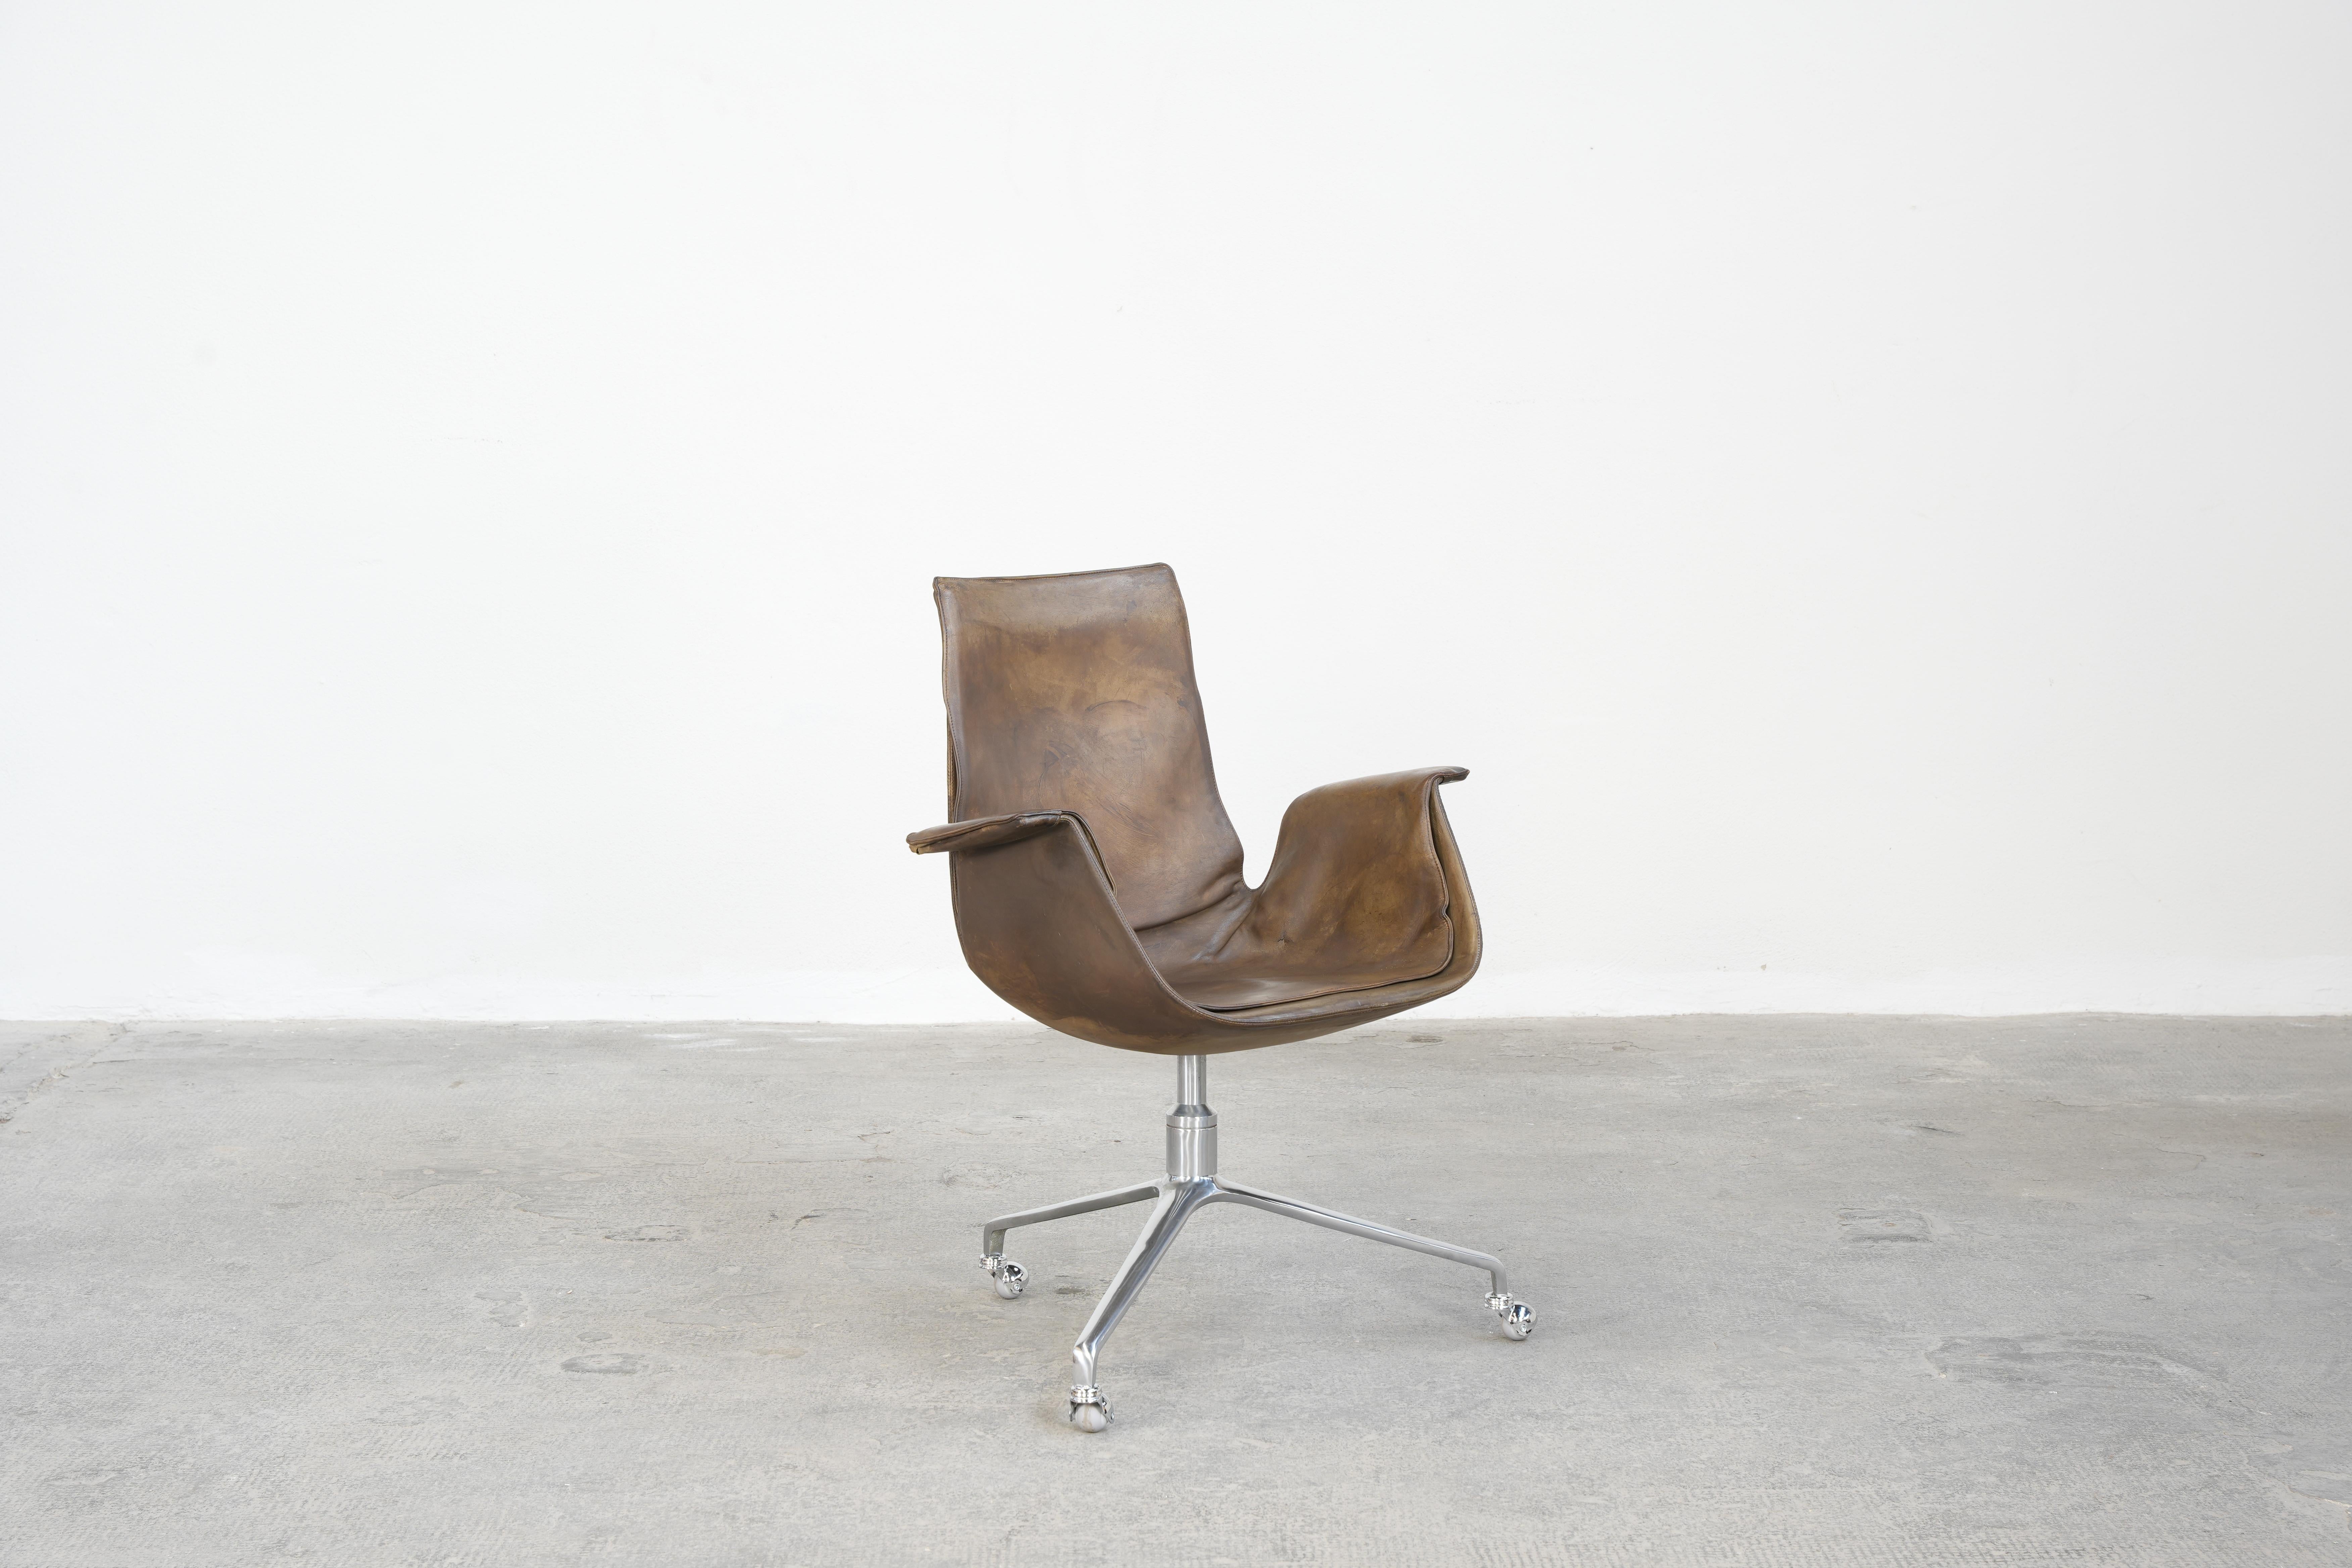 Beautiful tulip chair designed by Preben Fabricius and Jørgen Kastholm and produced by Alfred Kill International. 
The chair comes in original condition with beautifully patinated leather in dark cognac brown.
Overall the chair is in a very good